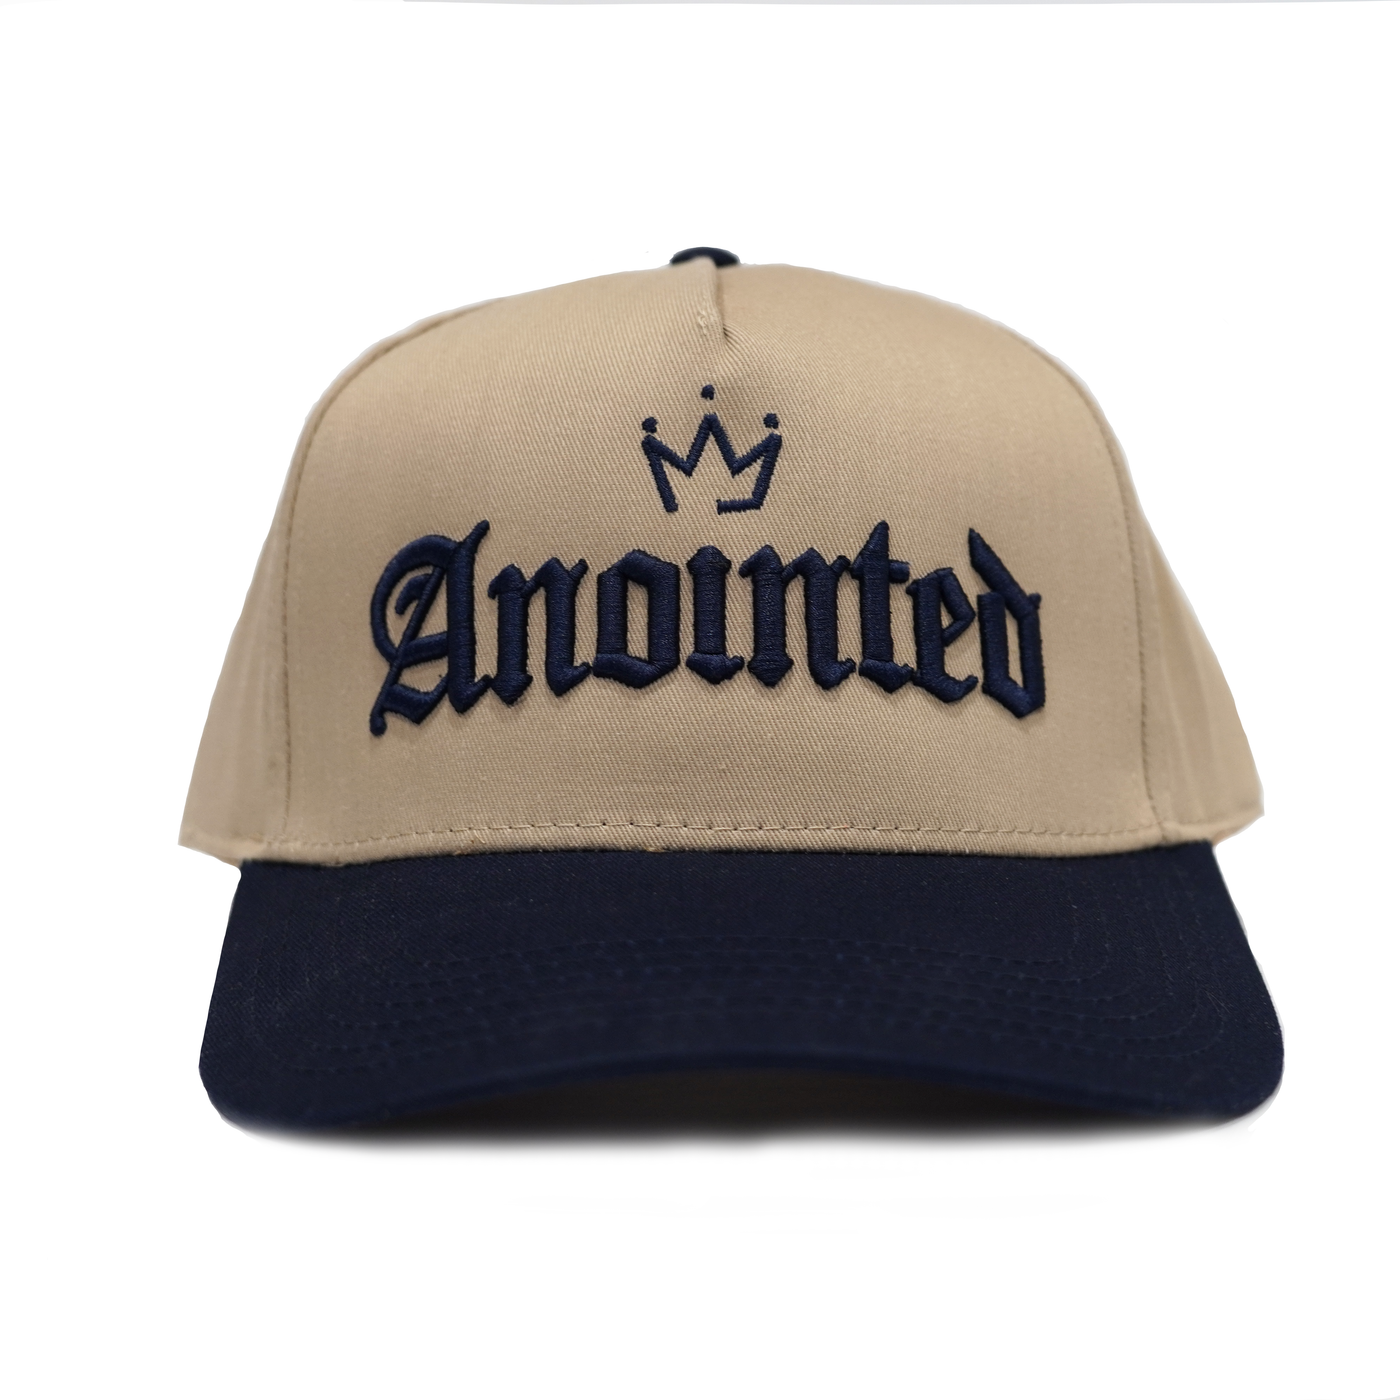 Anointed 2-Toned Snapback - Dark Navy Berry + Biscuit